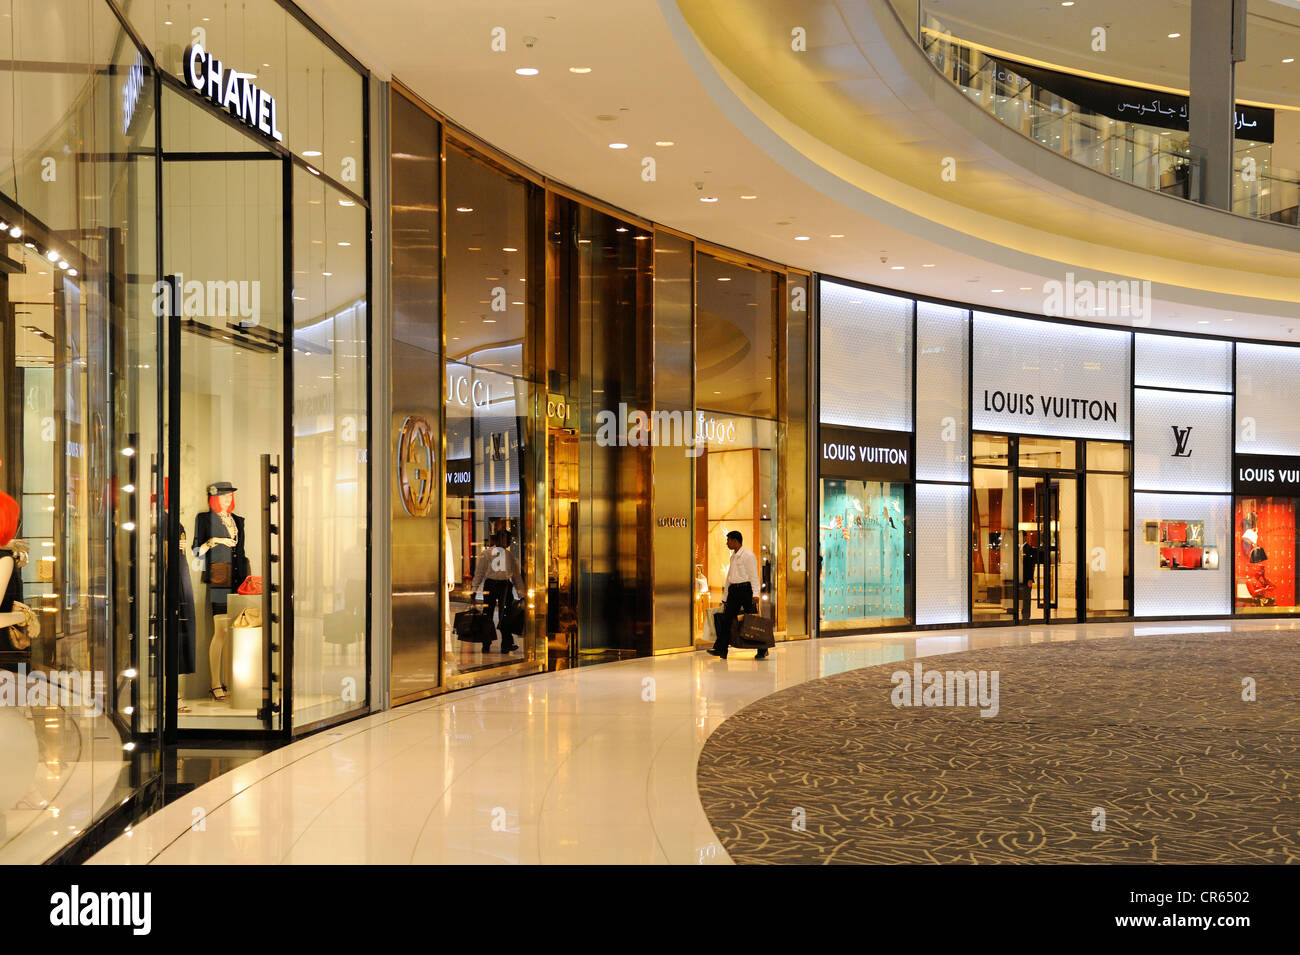 Louis Vuitton, Chanel, Gucci, at the Fashion Avenue, with 70 world brand shops of the Haute Couture,  Mall, Stock Photo